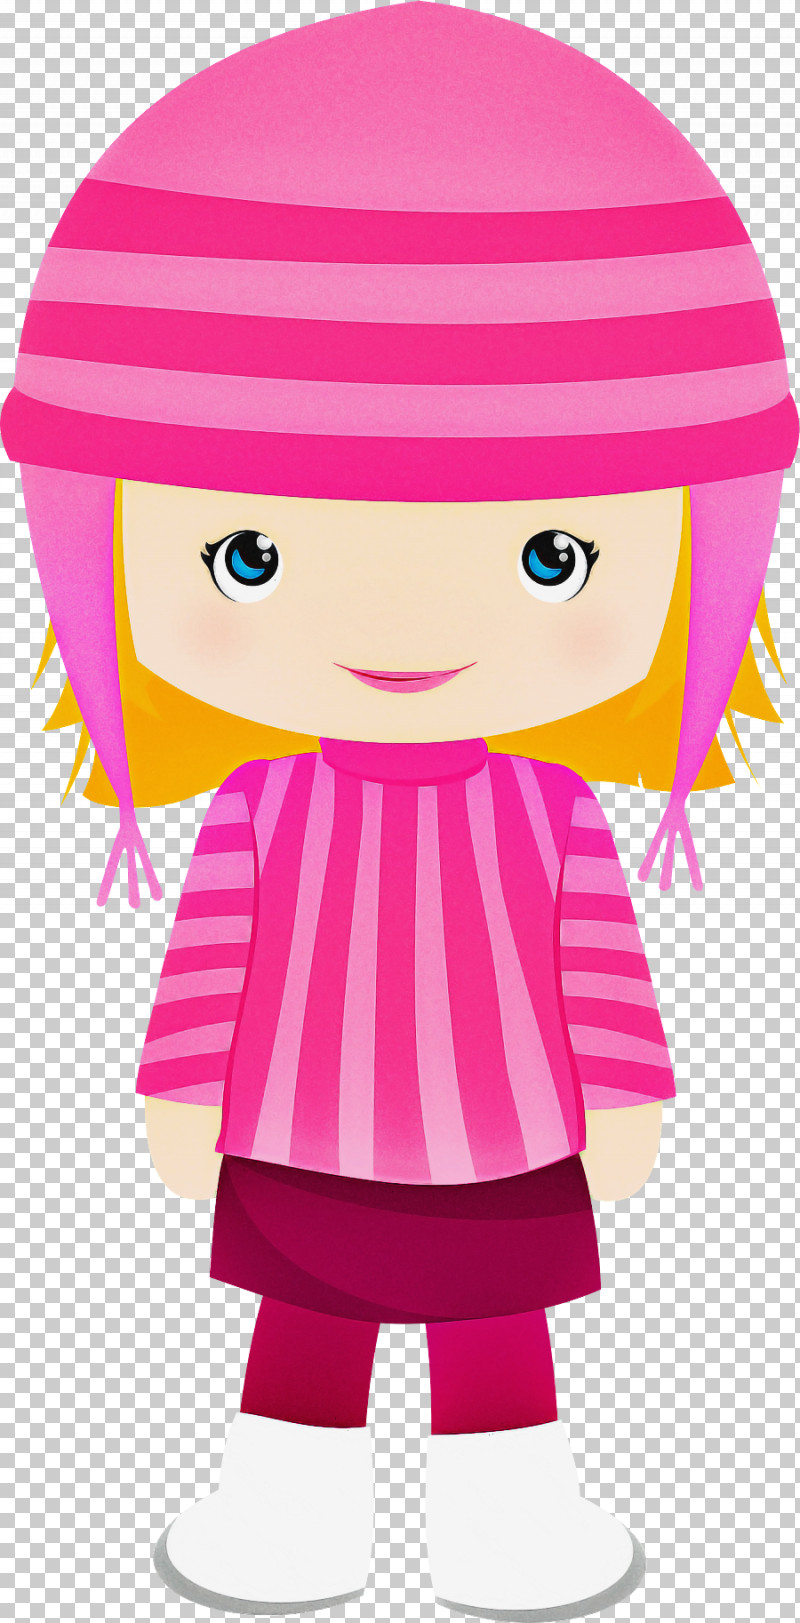 Cartoon Pink Doll Magenta Toy PNG, Clipart, Cartoon, Doll, Magenta, Pink, Toy Free PNG Download